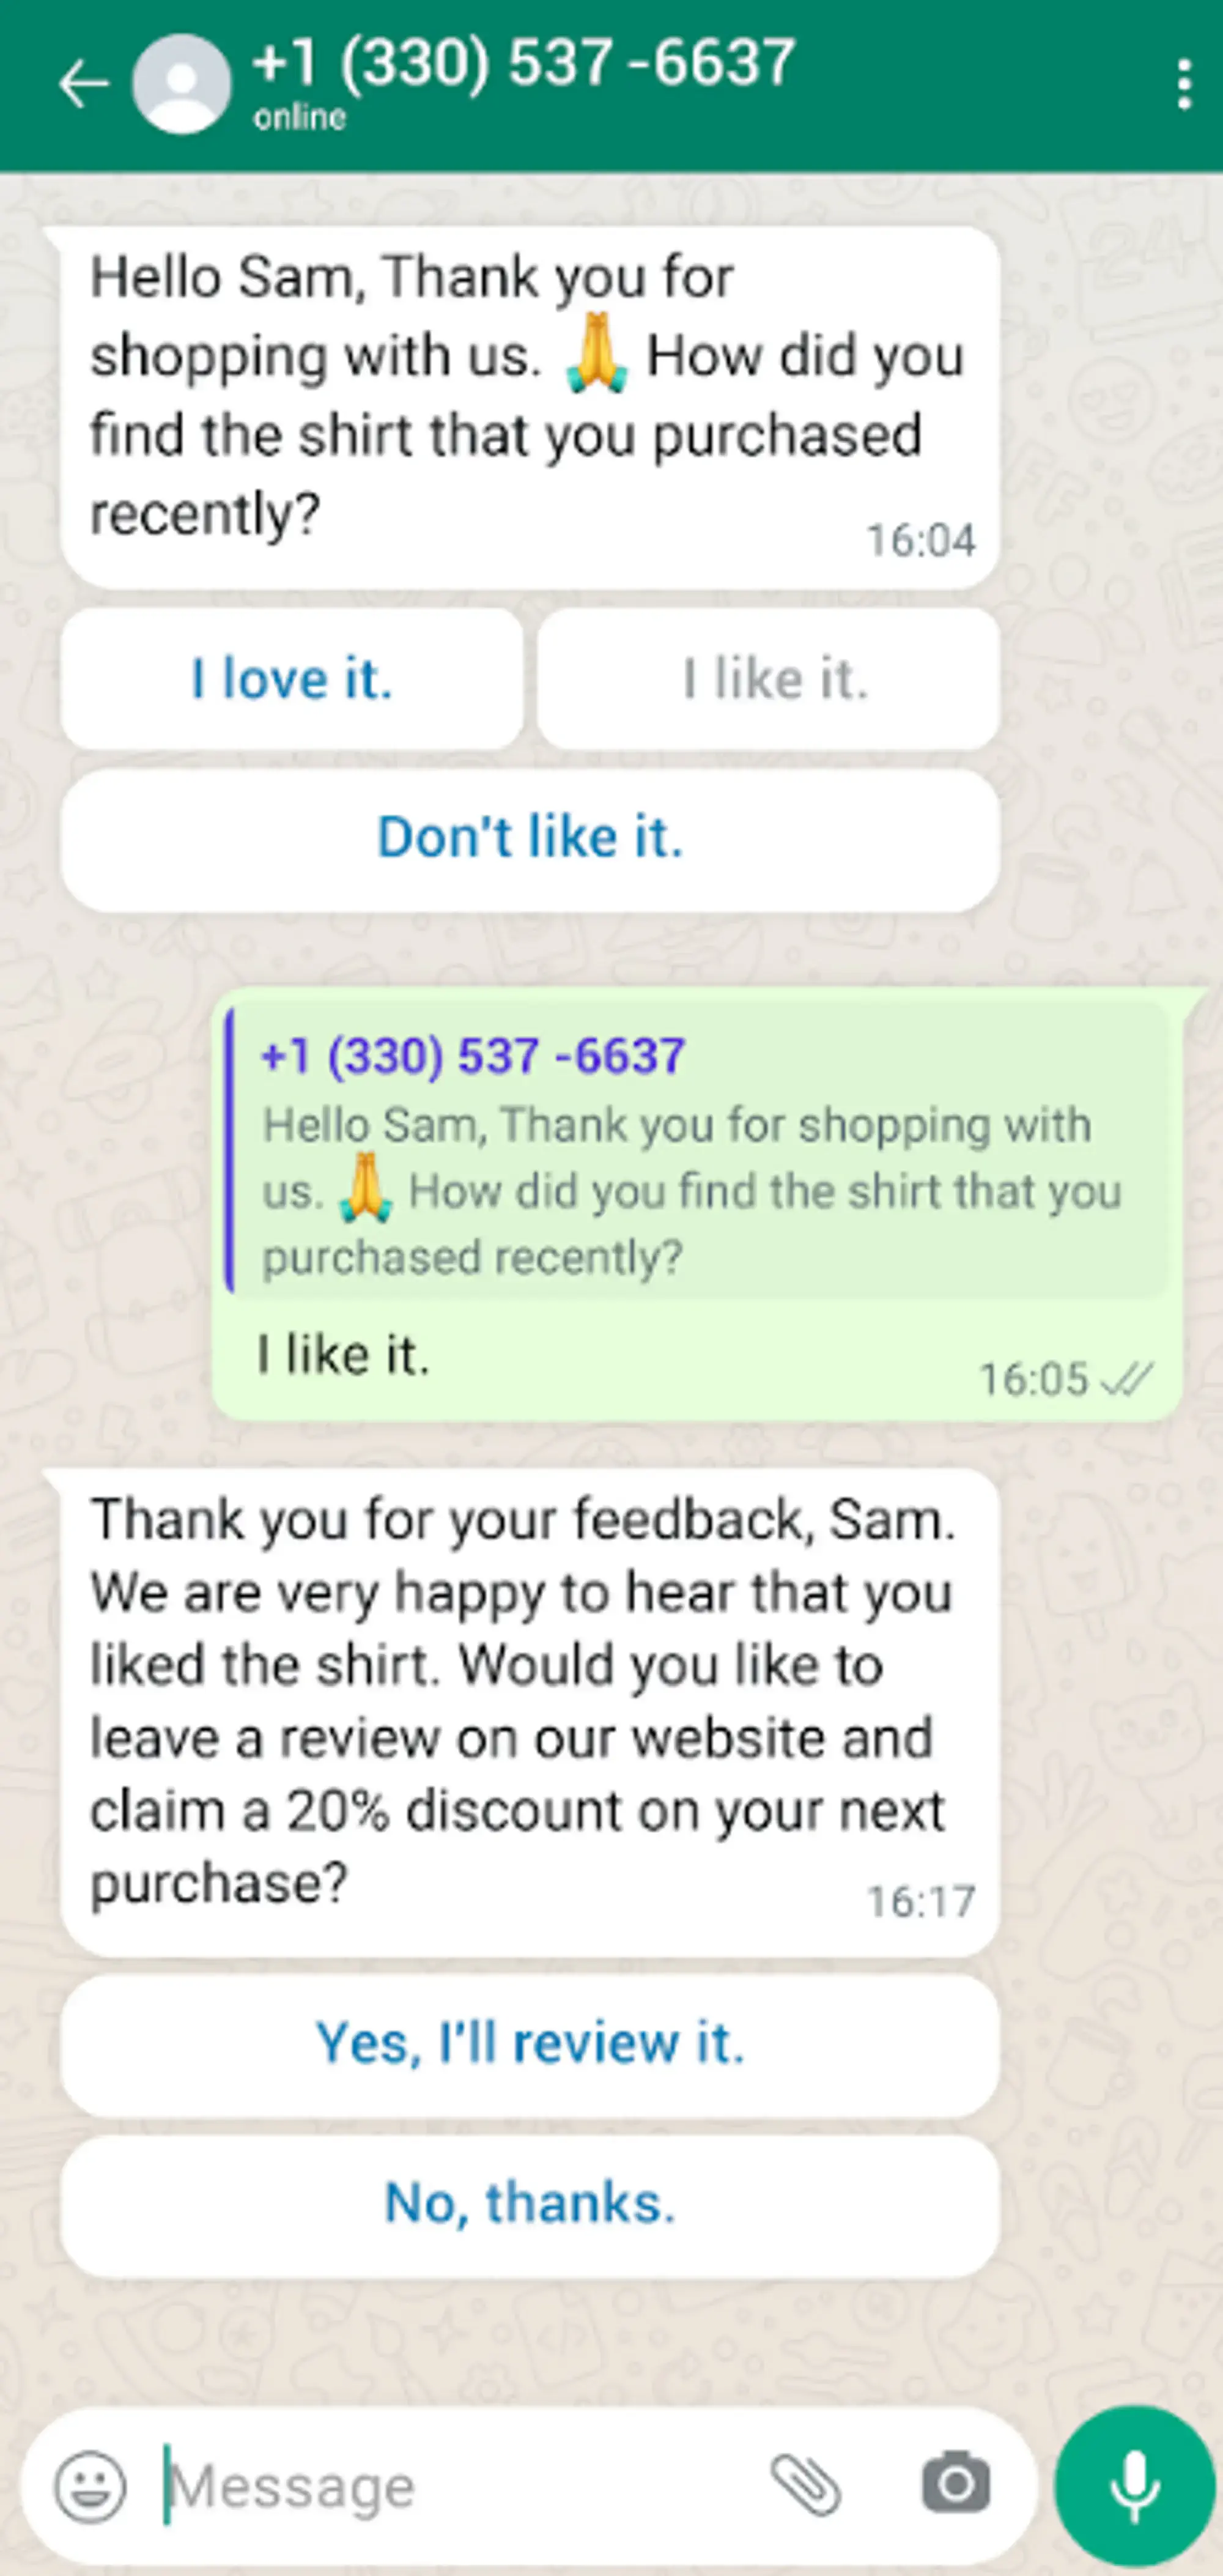 WhatsApp message asking for feedback